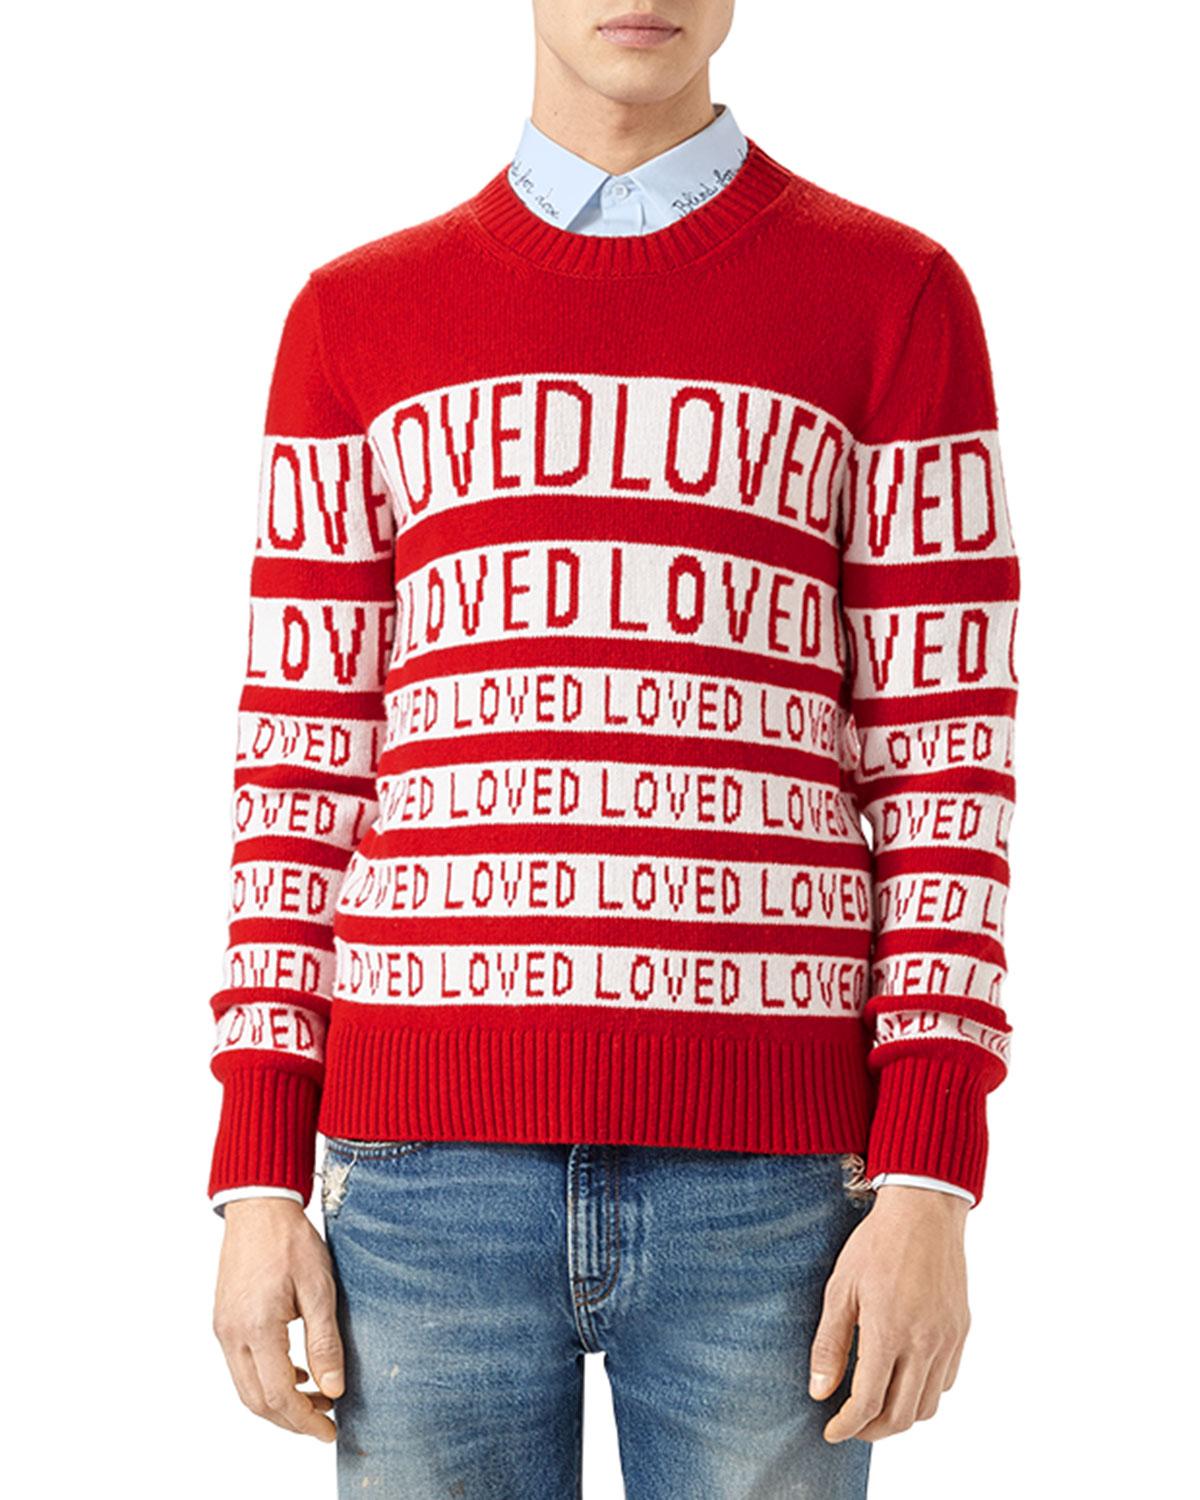 Gucci Wool Loved Jacquard Sweater in Red for Men - Lyst